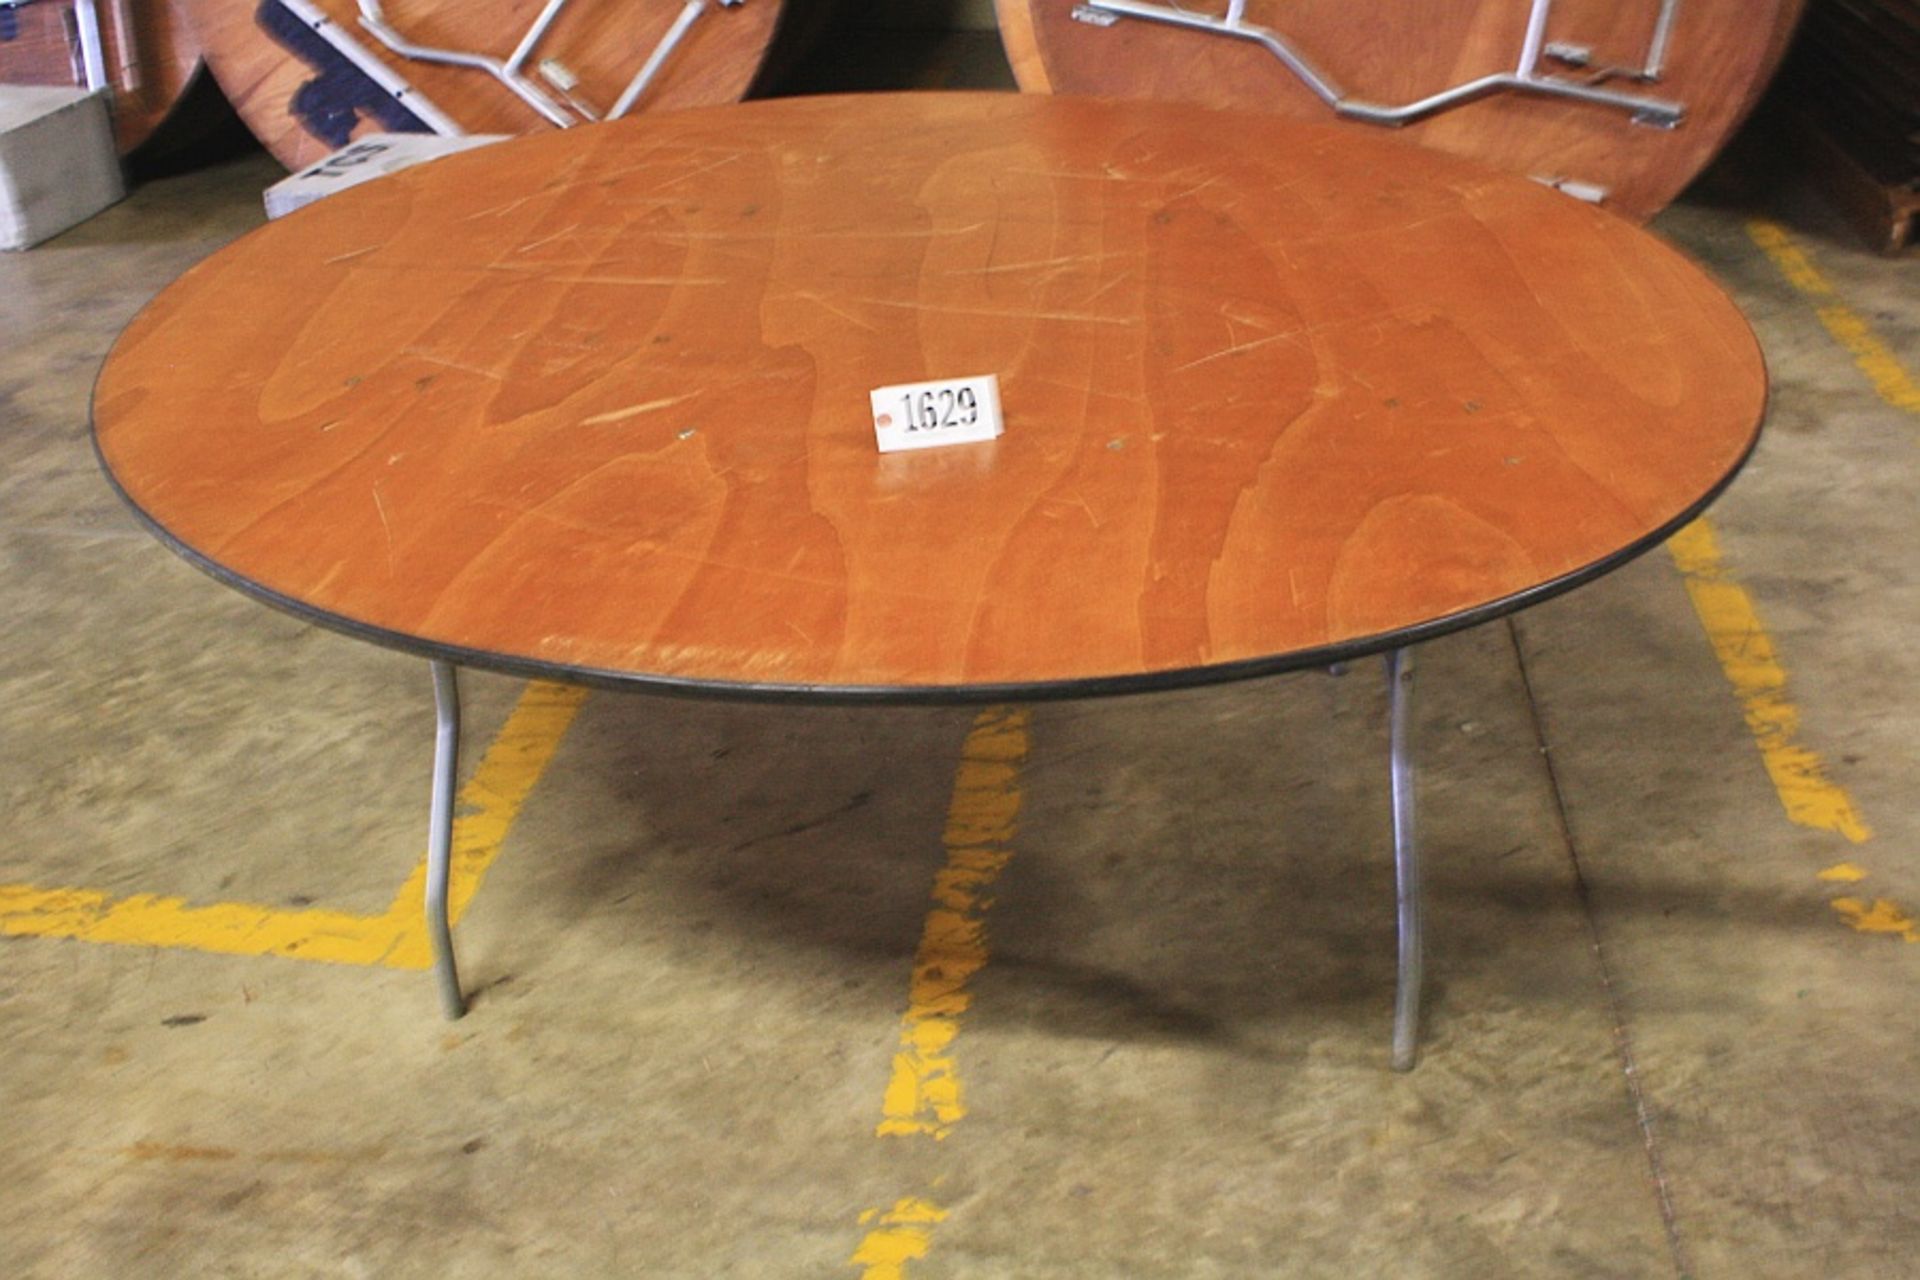 6' Round Wood Banquet Table